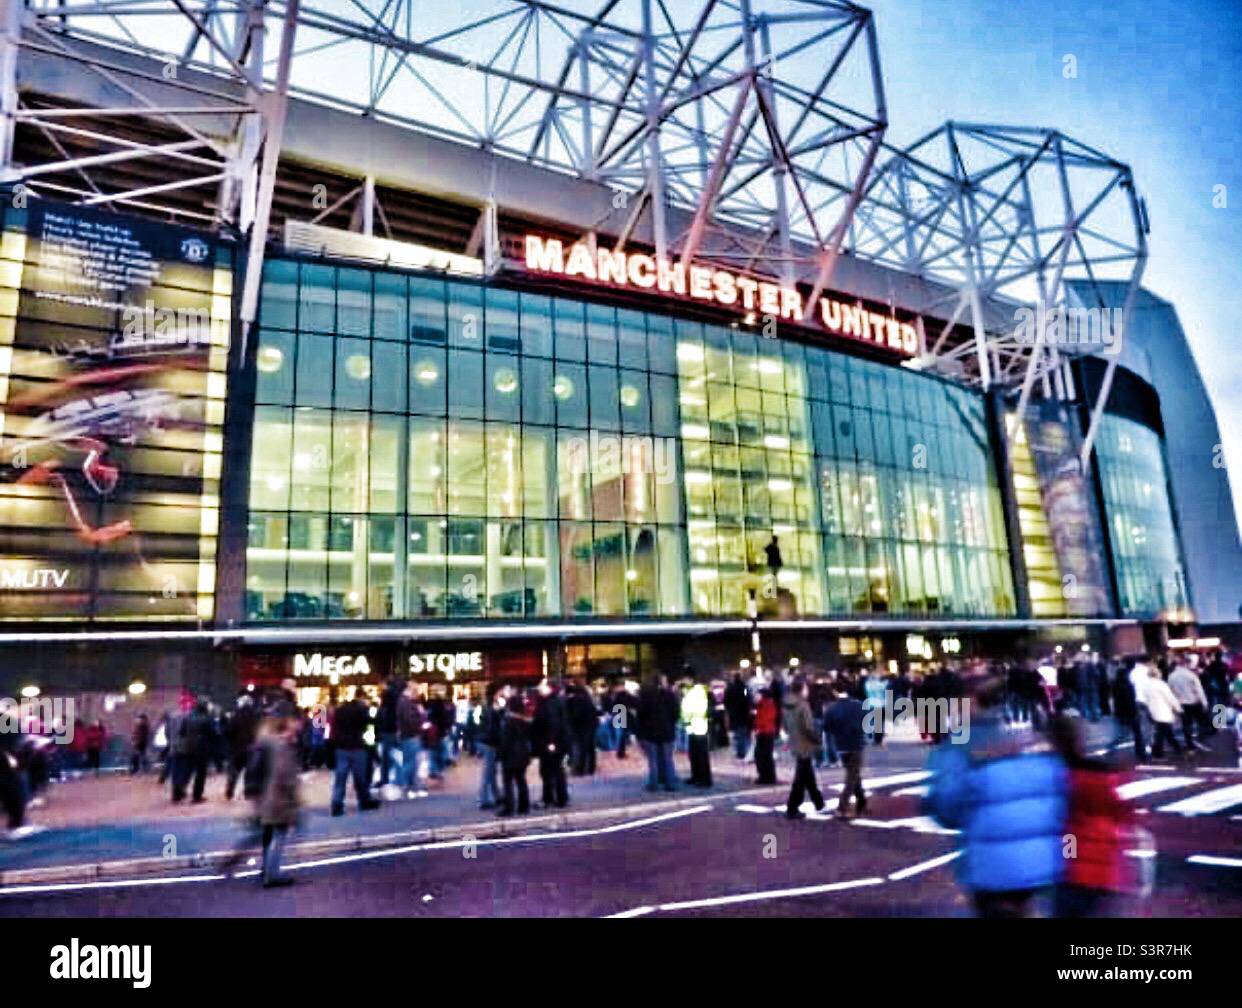 Match Day hustle and bustle at Old Trafford, home of Manchester United, aka “The Red Devils” Stock Photo